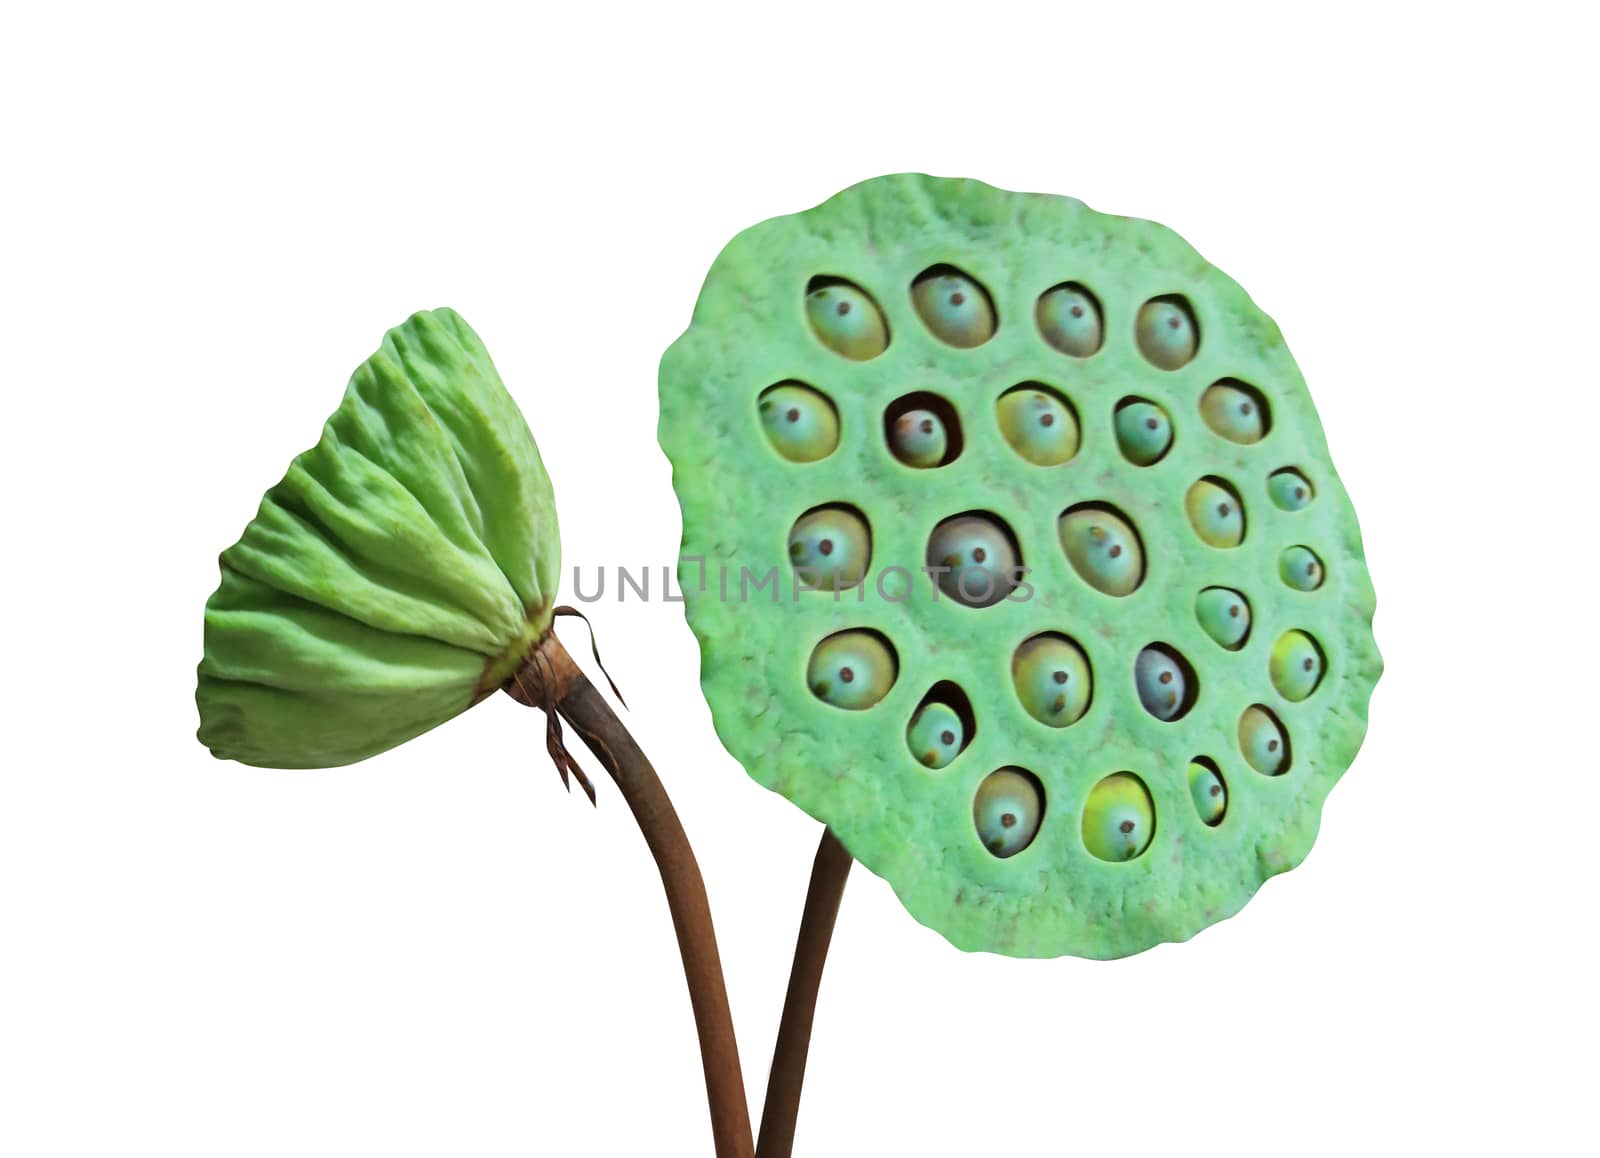 Lotus seeds used in chinese medicine and cooking